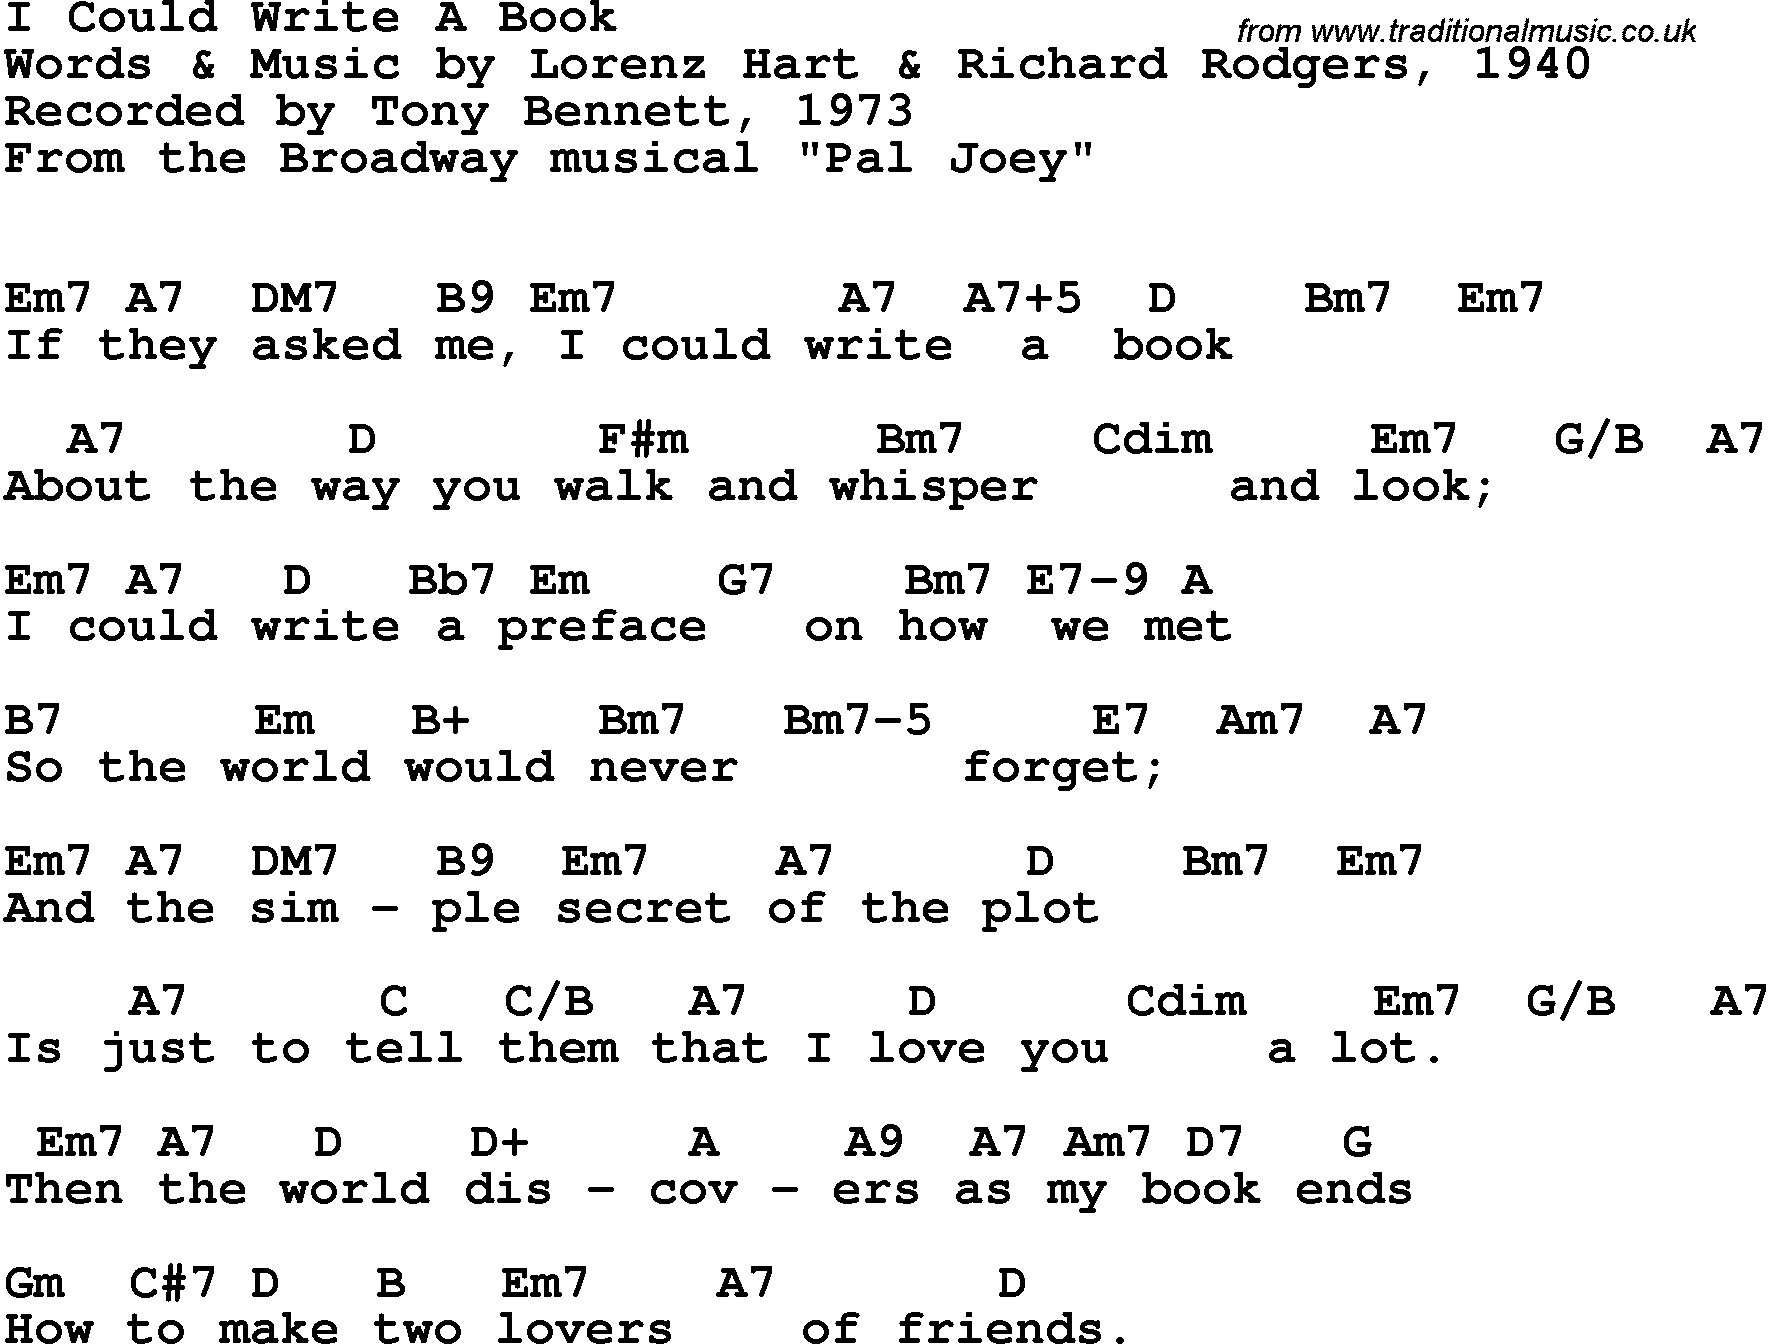 Song Lyrics with guitar chords for I Could Write A Book - Tony Bennett, 1973